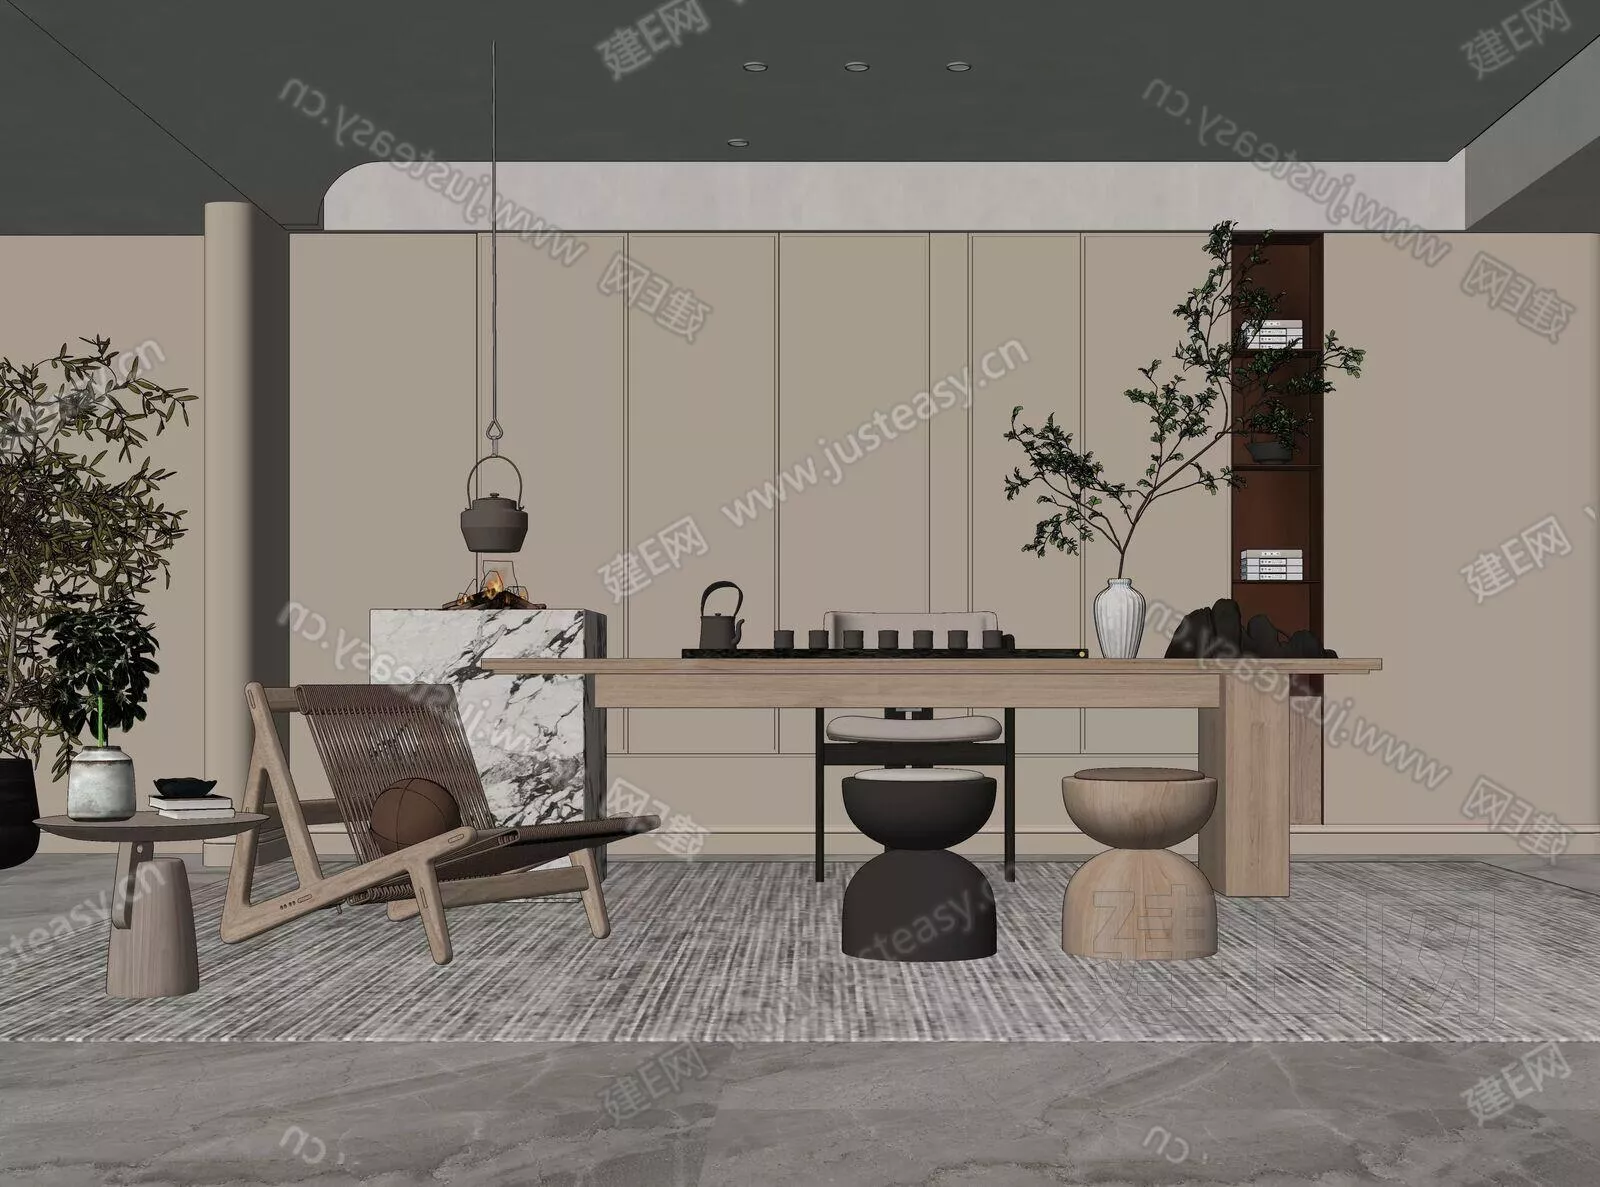 CHINESE TEAROOM - SKETCHUP 3D SCENE - ENSCAPE - 116213197